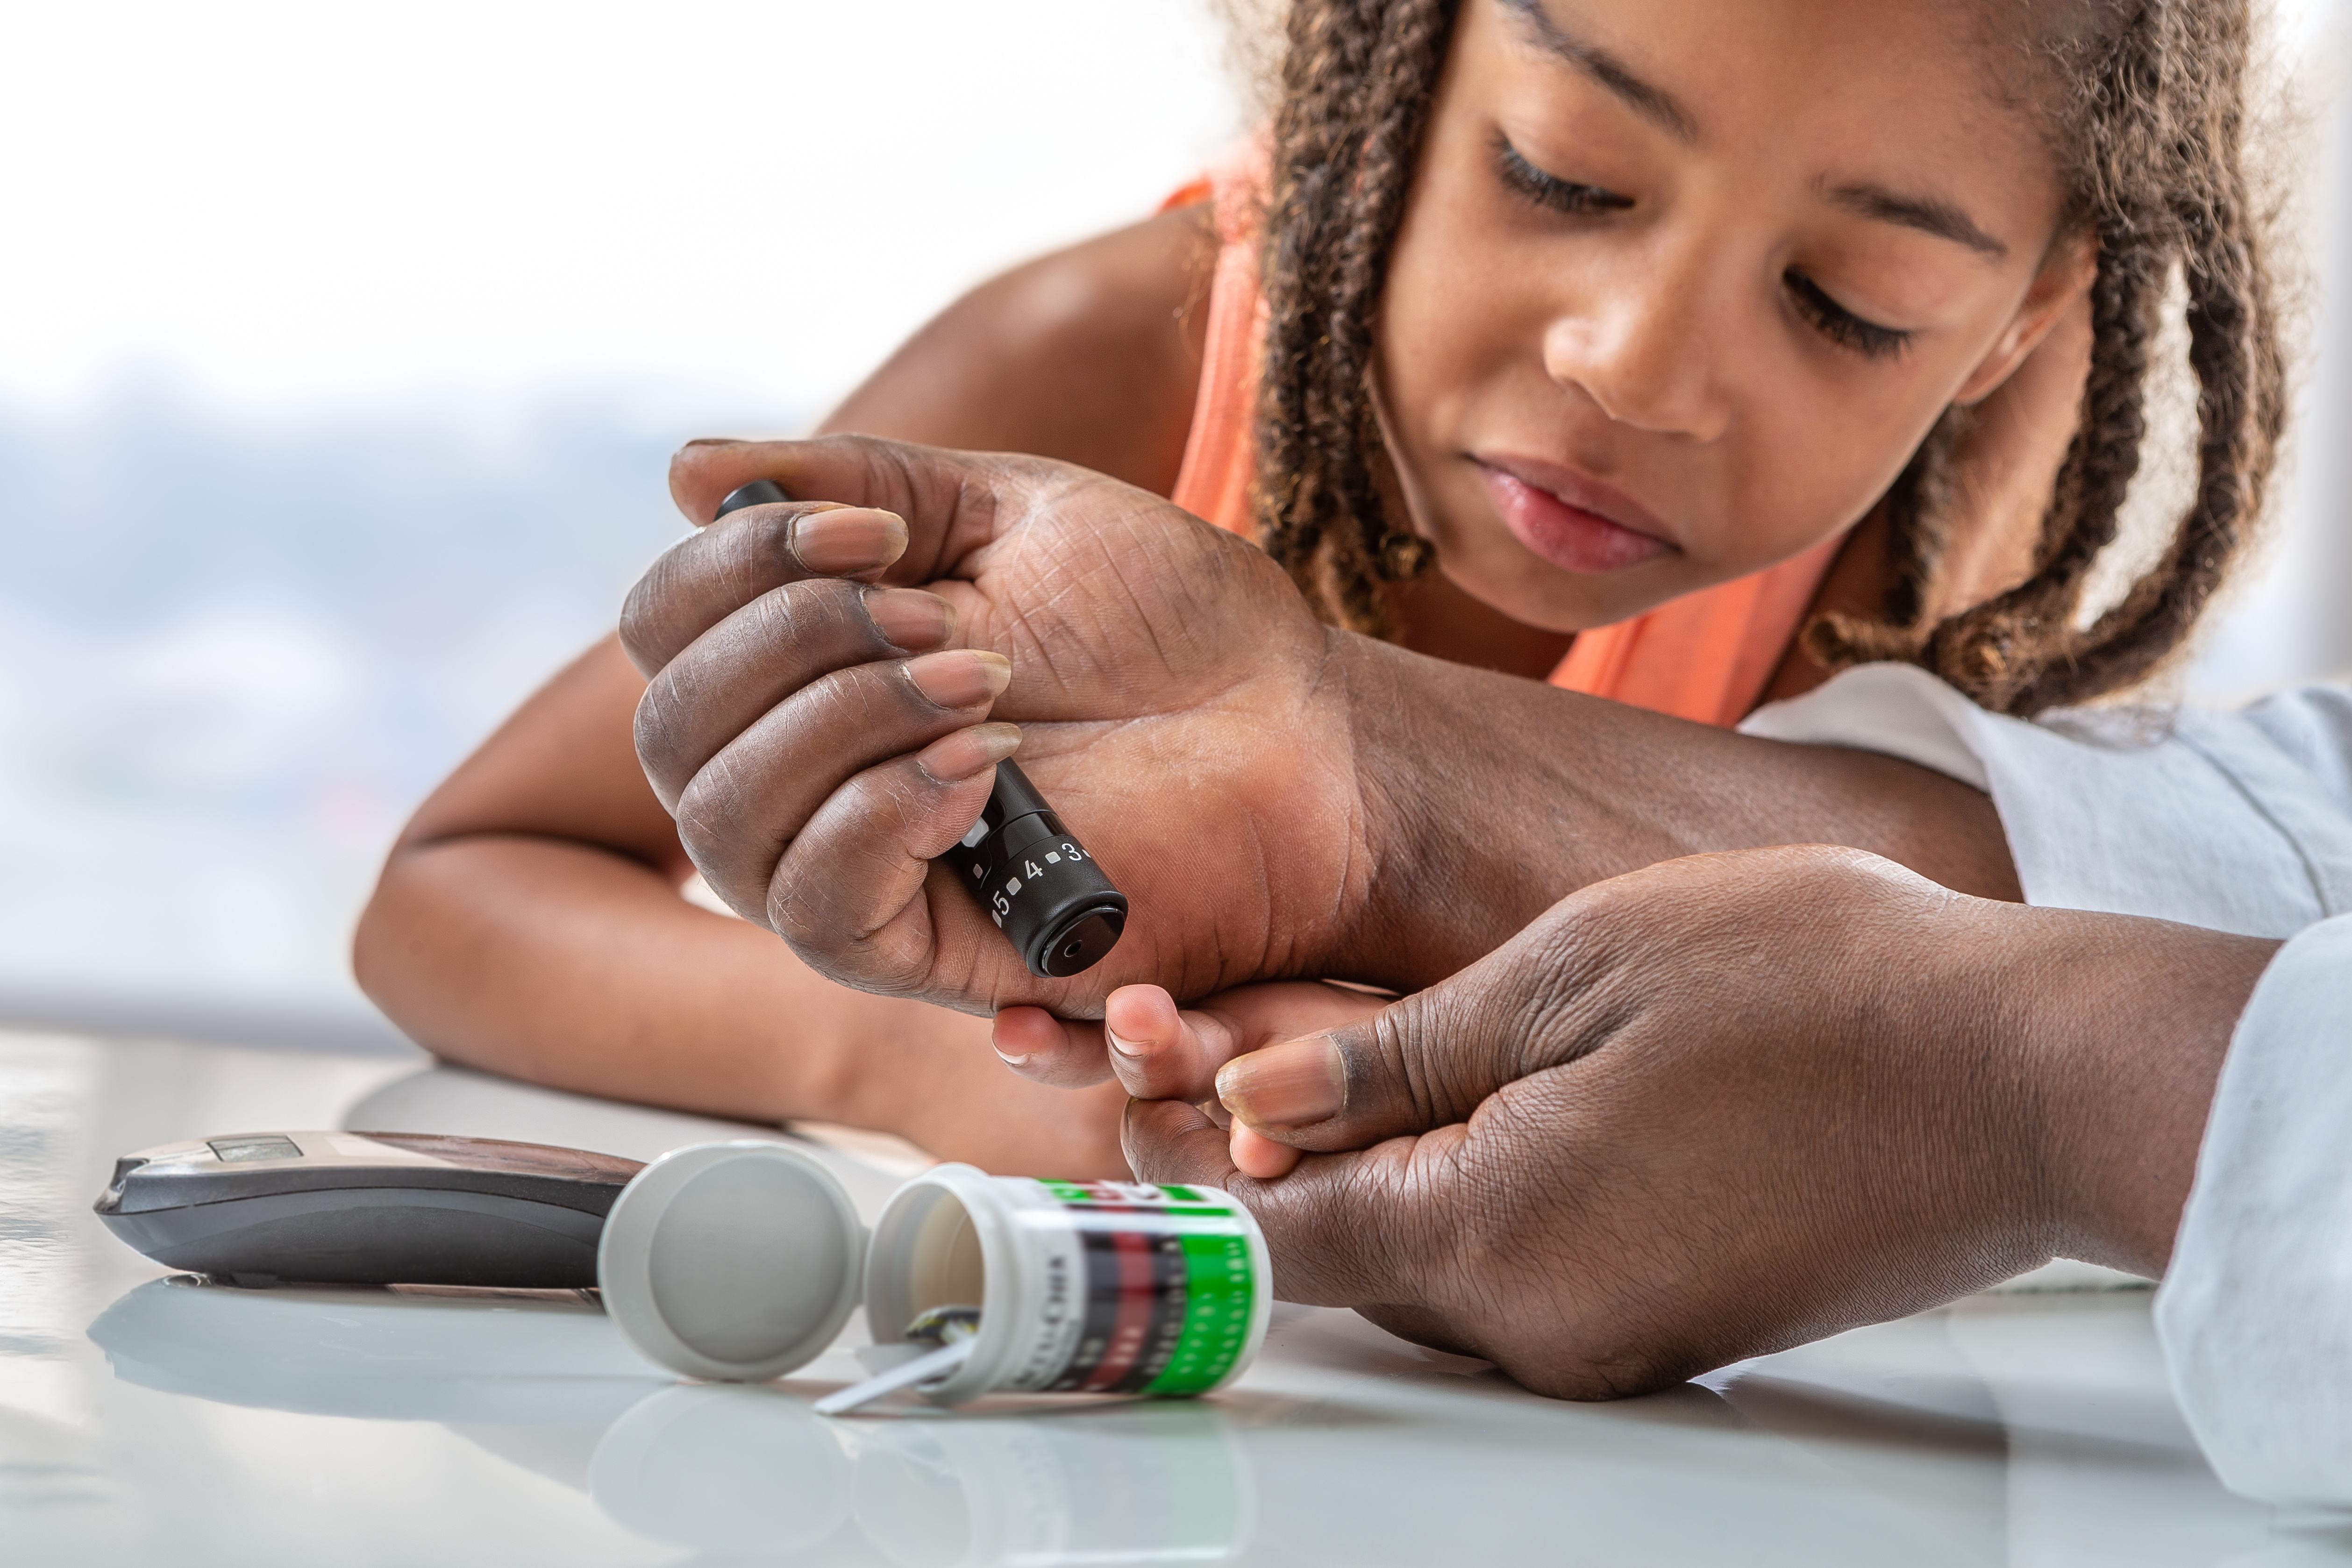 How to Check Blood Sugar the Right Way